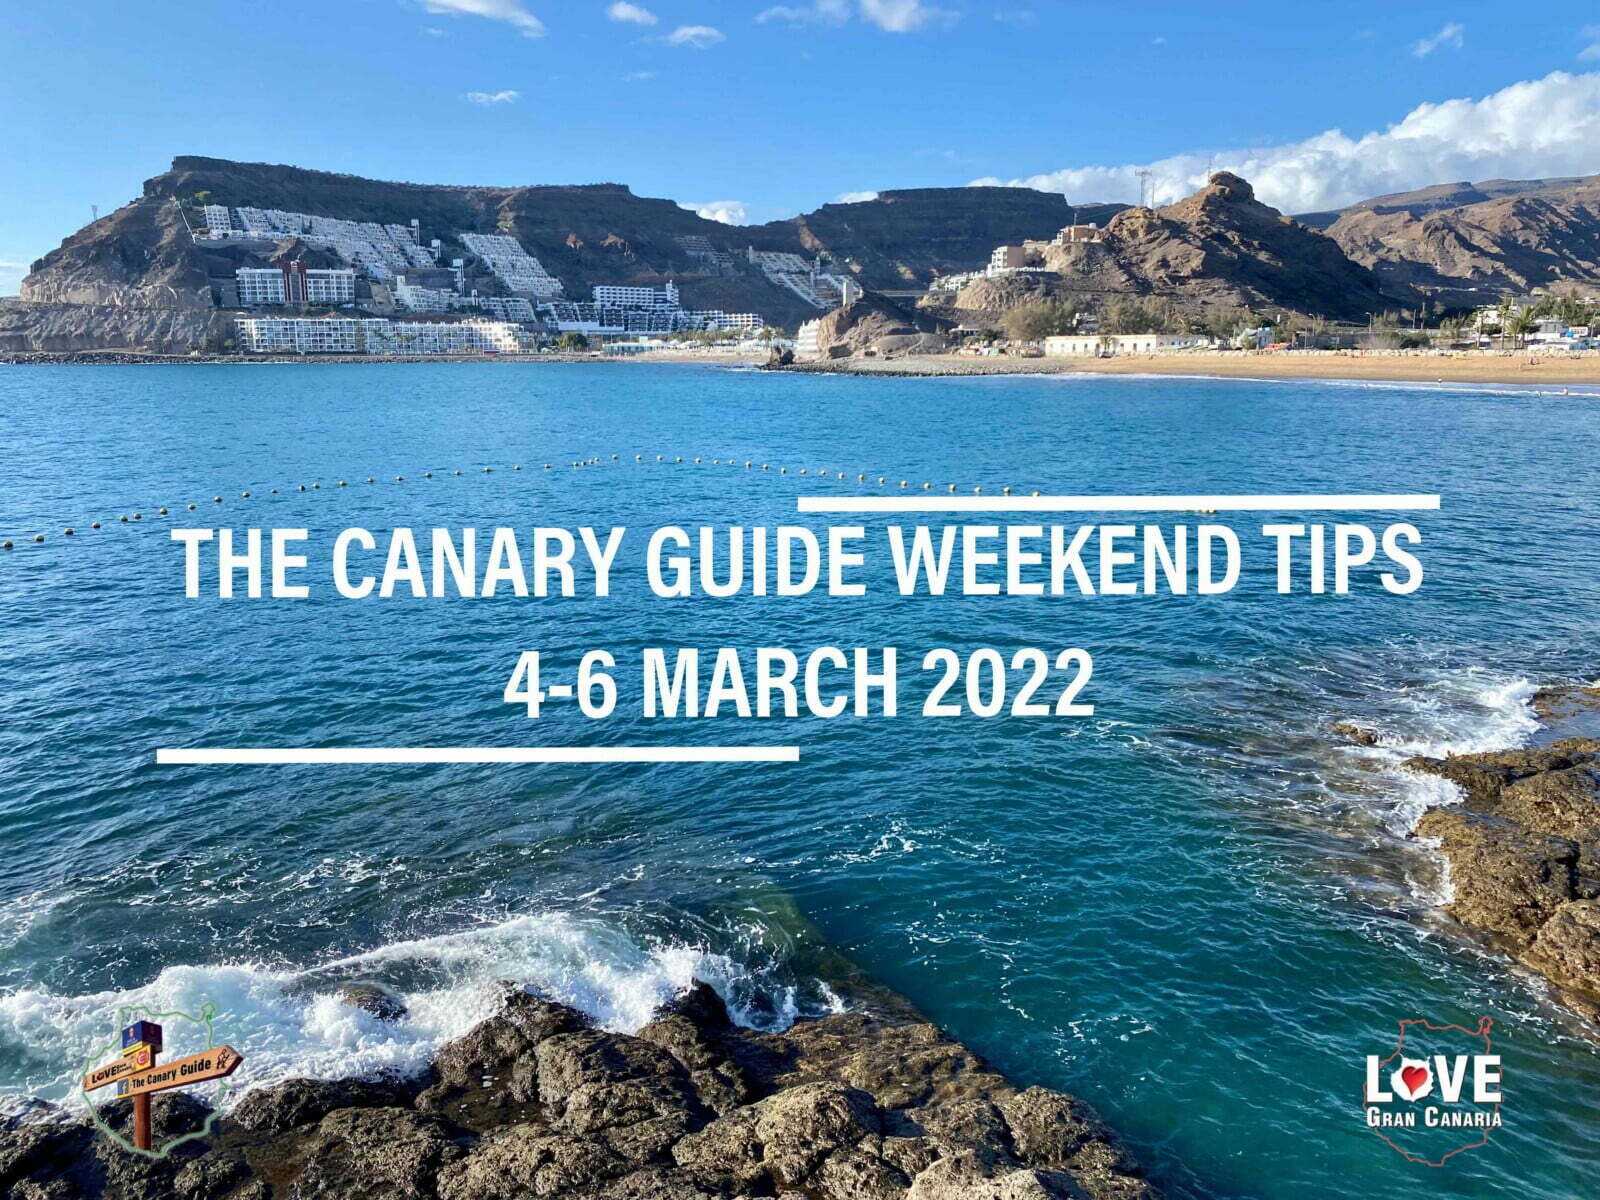 The Canary Guide #WeekendTips 4-6 March 2022